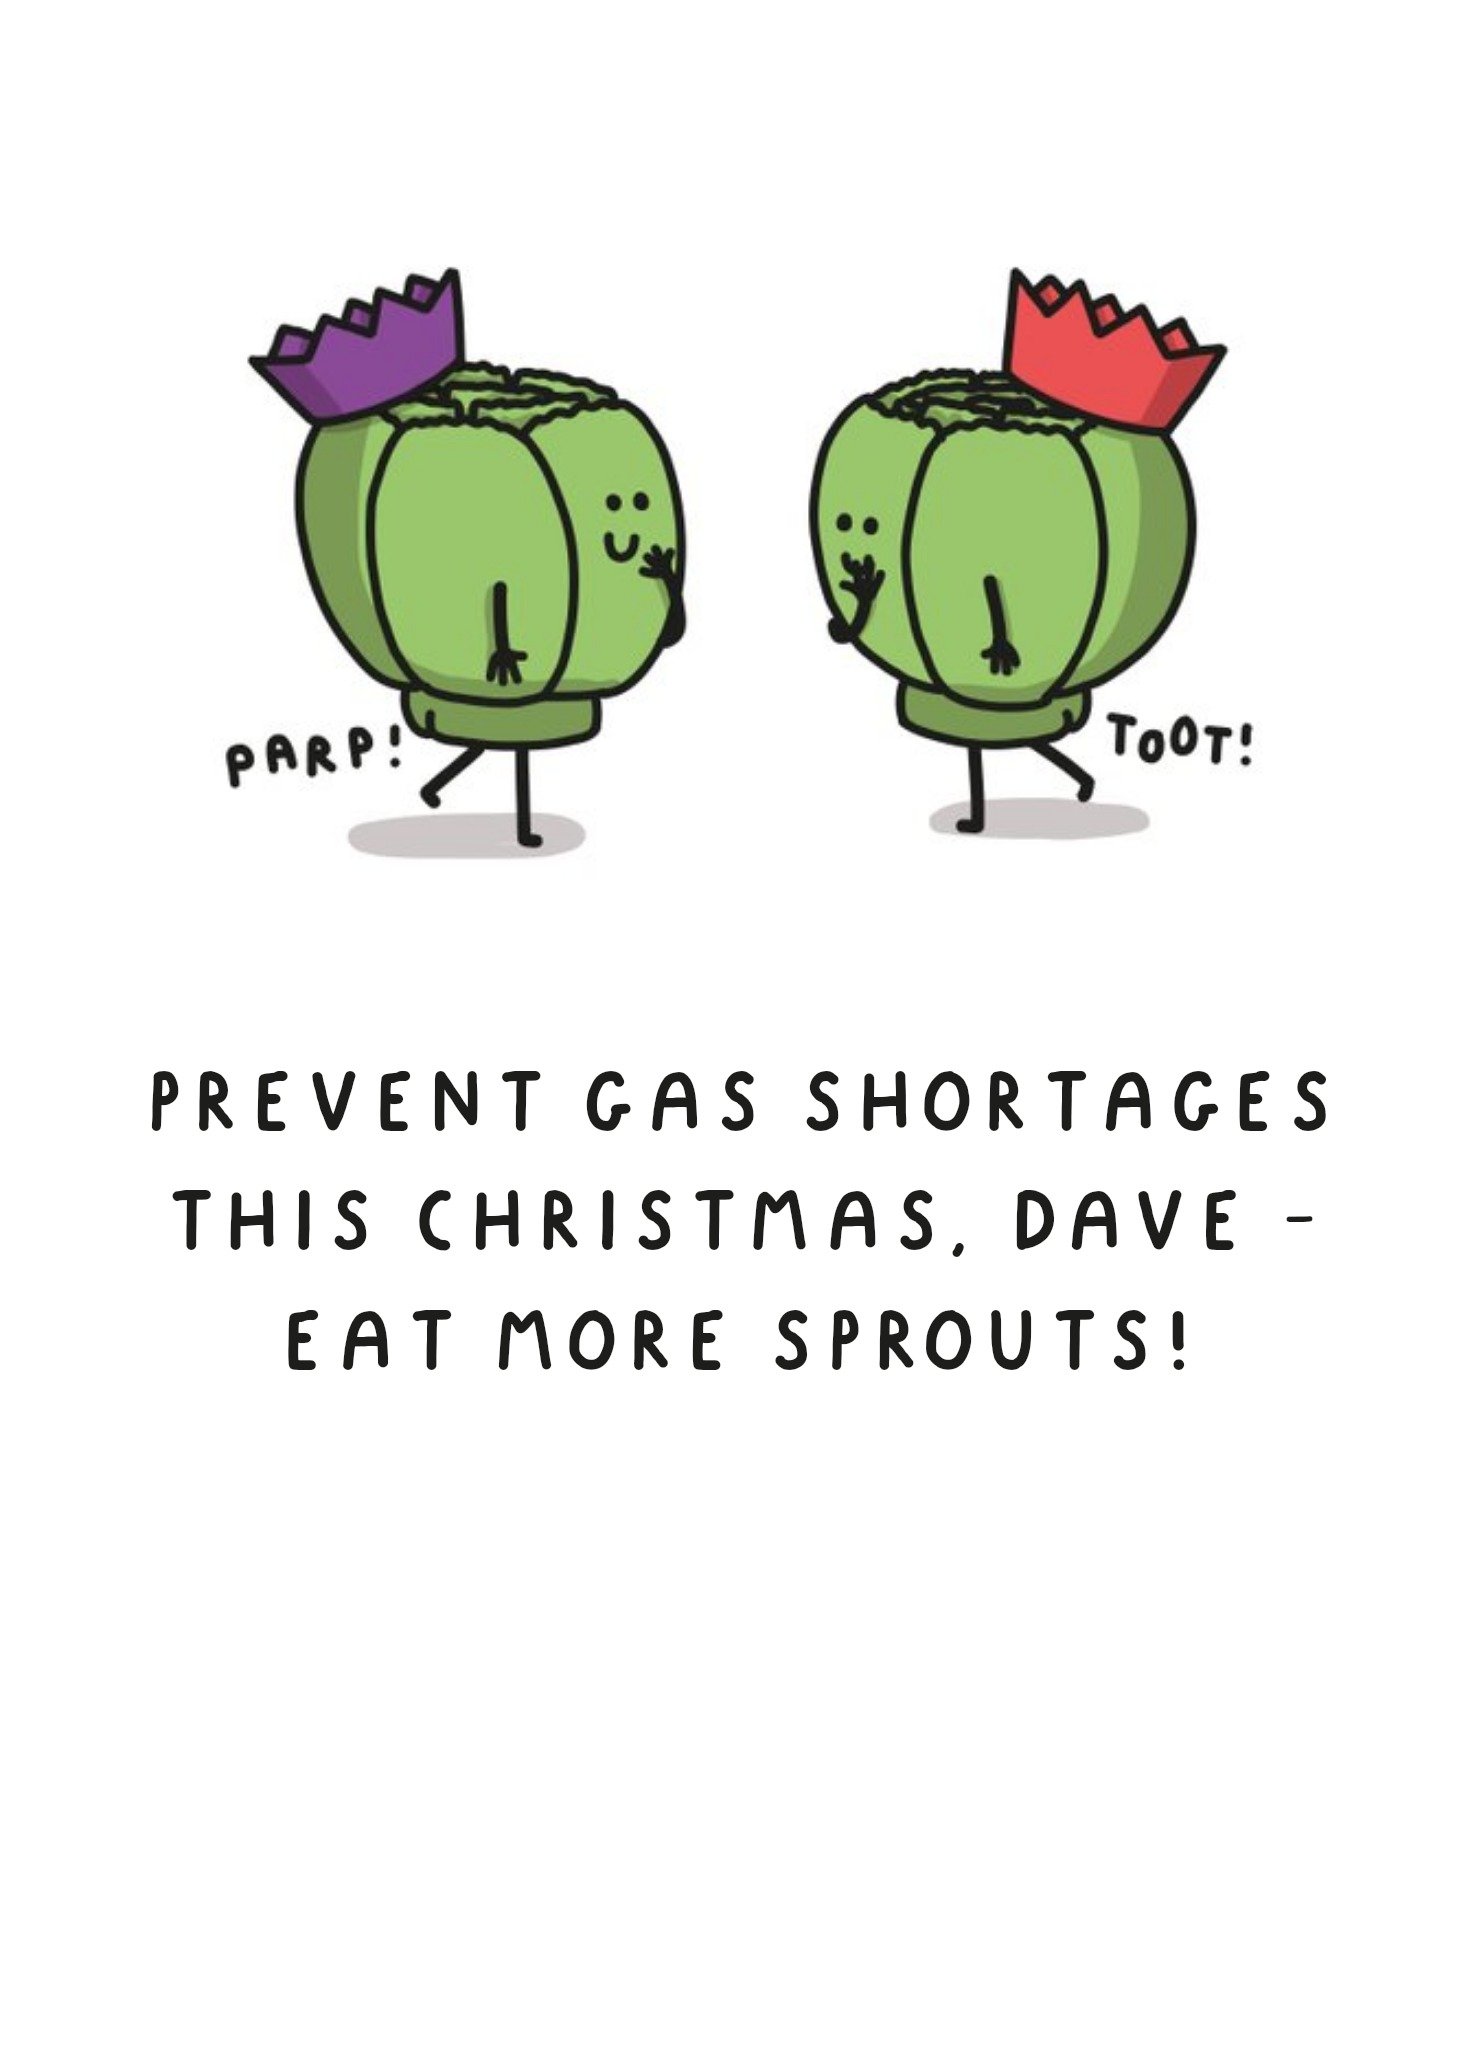 Moonpig Illustration Of Two Brussel Sprout Characters Humorous Christmas Card, Large